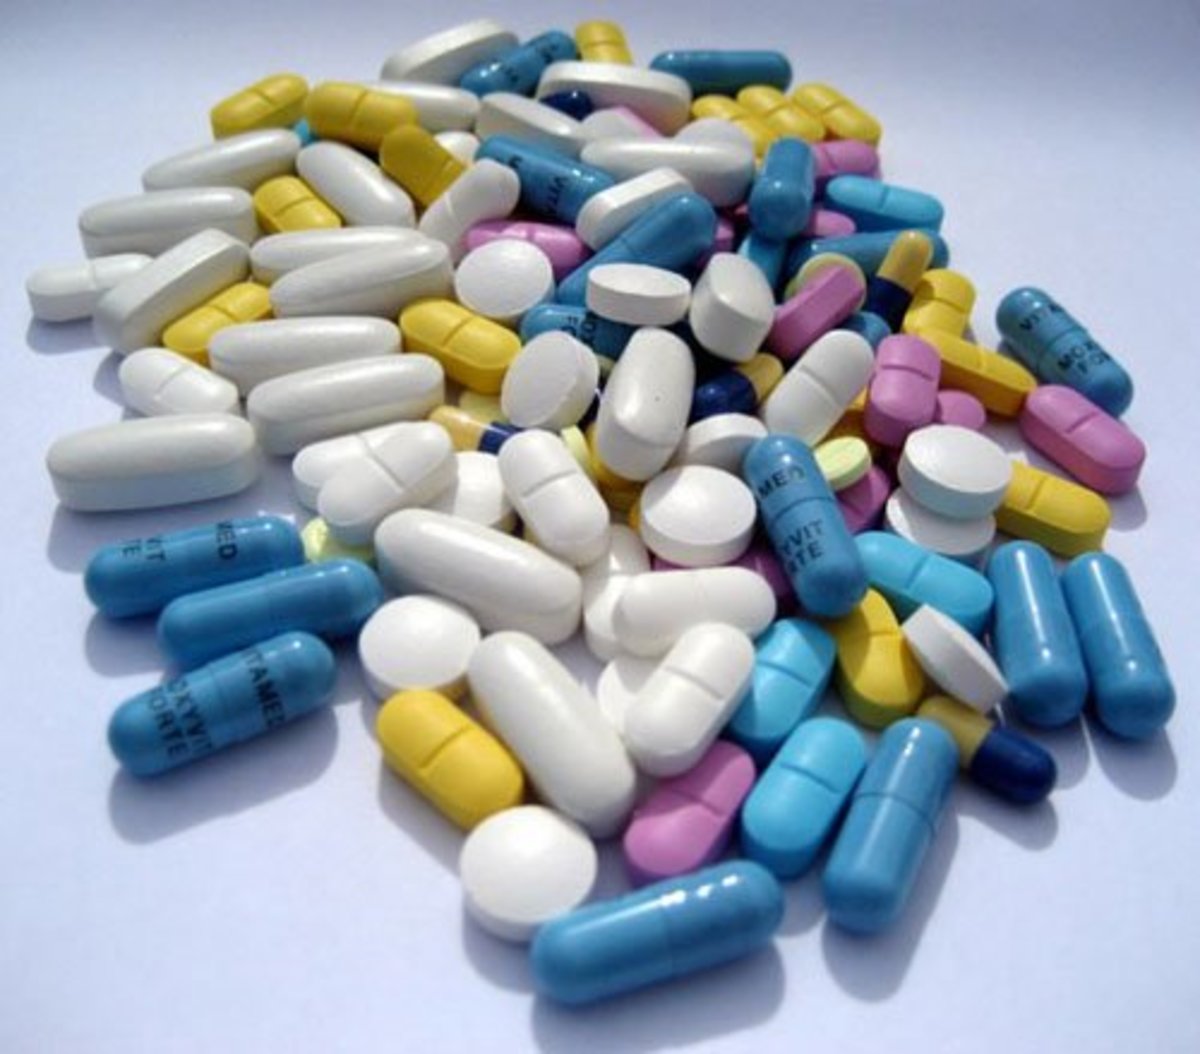 What Are the Pharmaceutical Sources of Drugs?